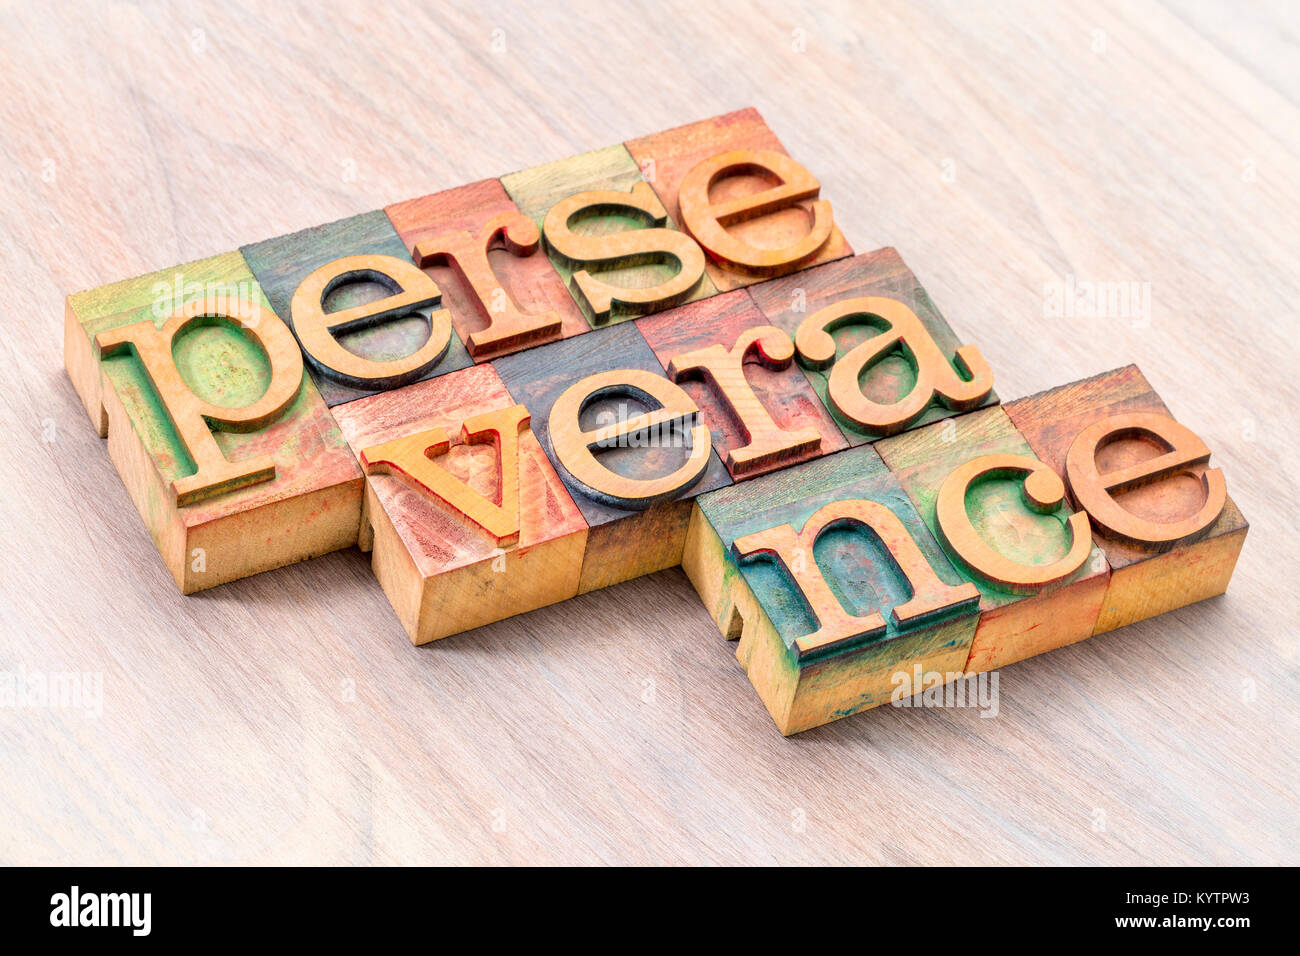 perseverance  - word abstract in letterpress wood type printing blocks Stock Photo